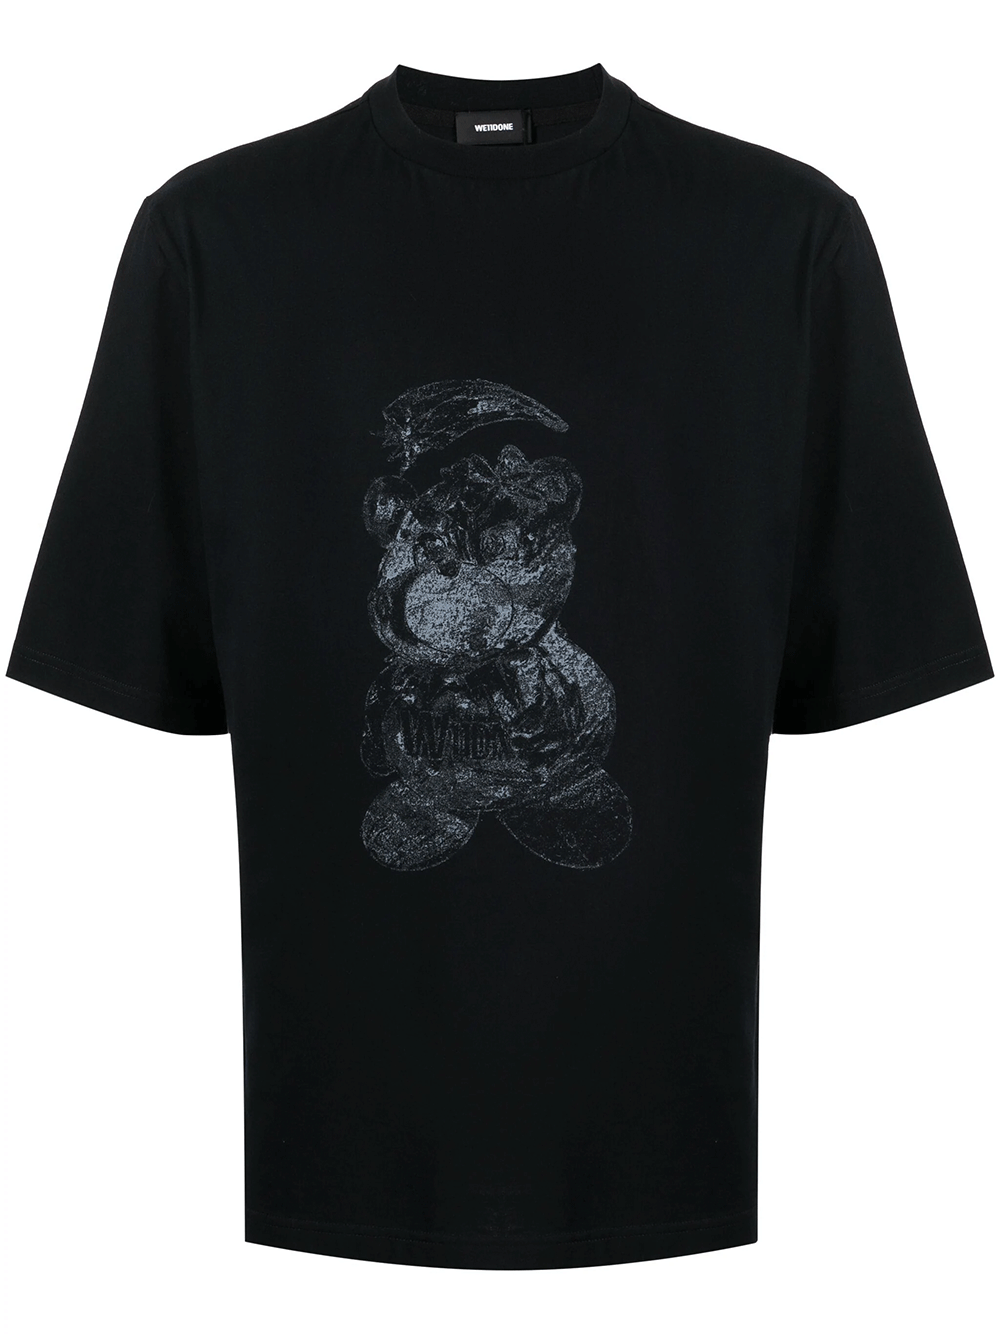 We11done-Black-Overdyed-Loose-Fit-T-Shirt-Black-1